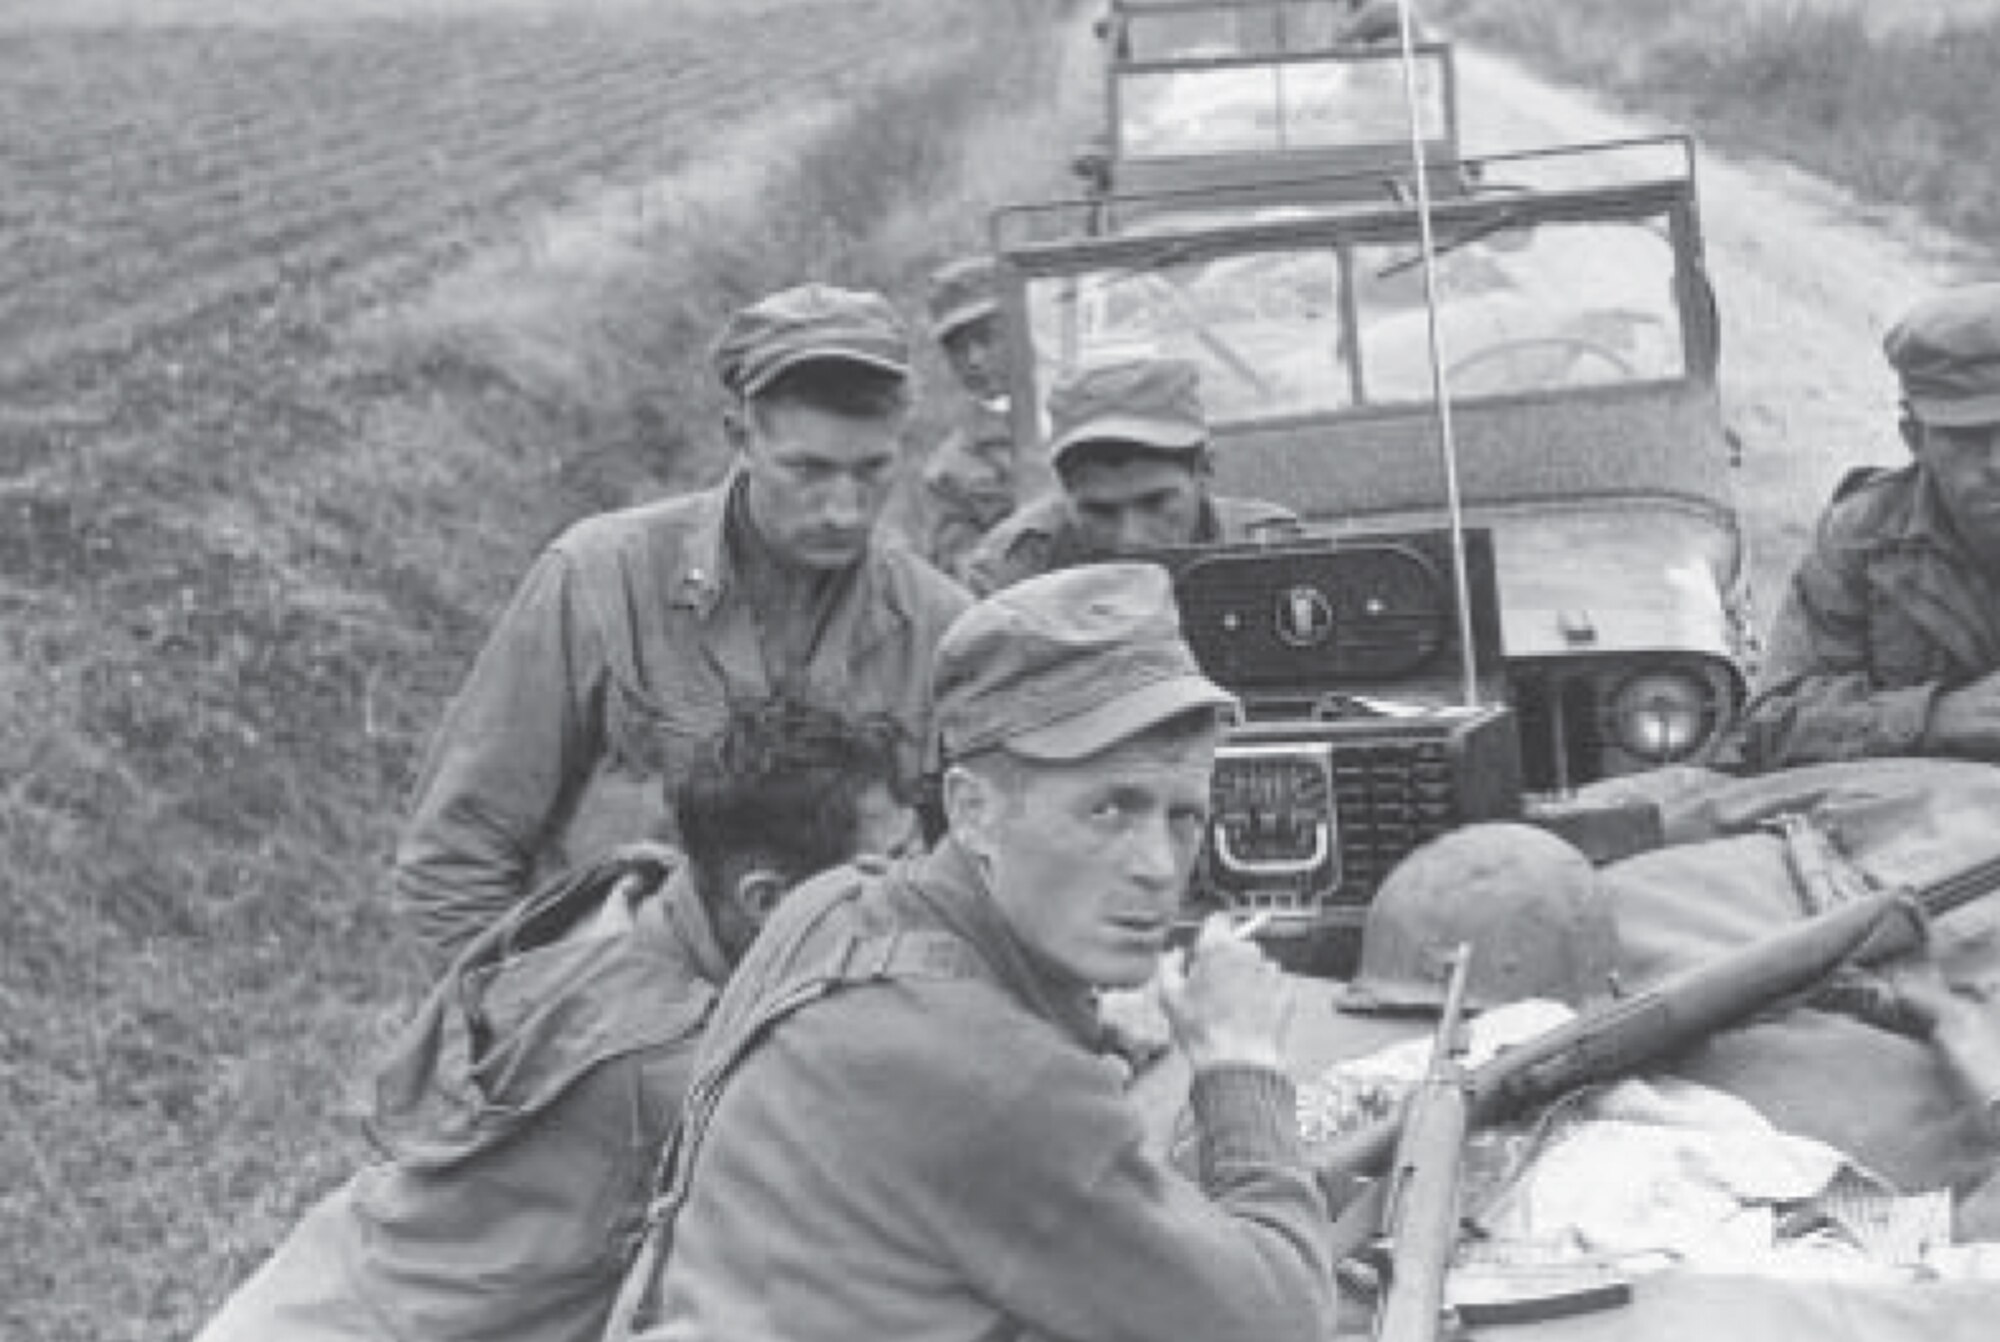 Army Lt. Olin “Short Round” Hardy and L Company infantrymen wait to hear news on the radio during the Korean War.

(Courtesy photo from the manuscript “Love Company - the predecessor to 'LOVE, Labor and Laughter'" at http://www.lovecompany.org/pdfs/LoveBook.pdf).